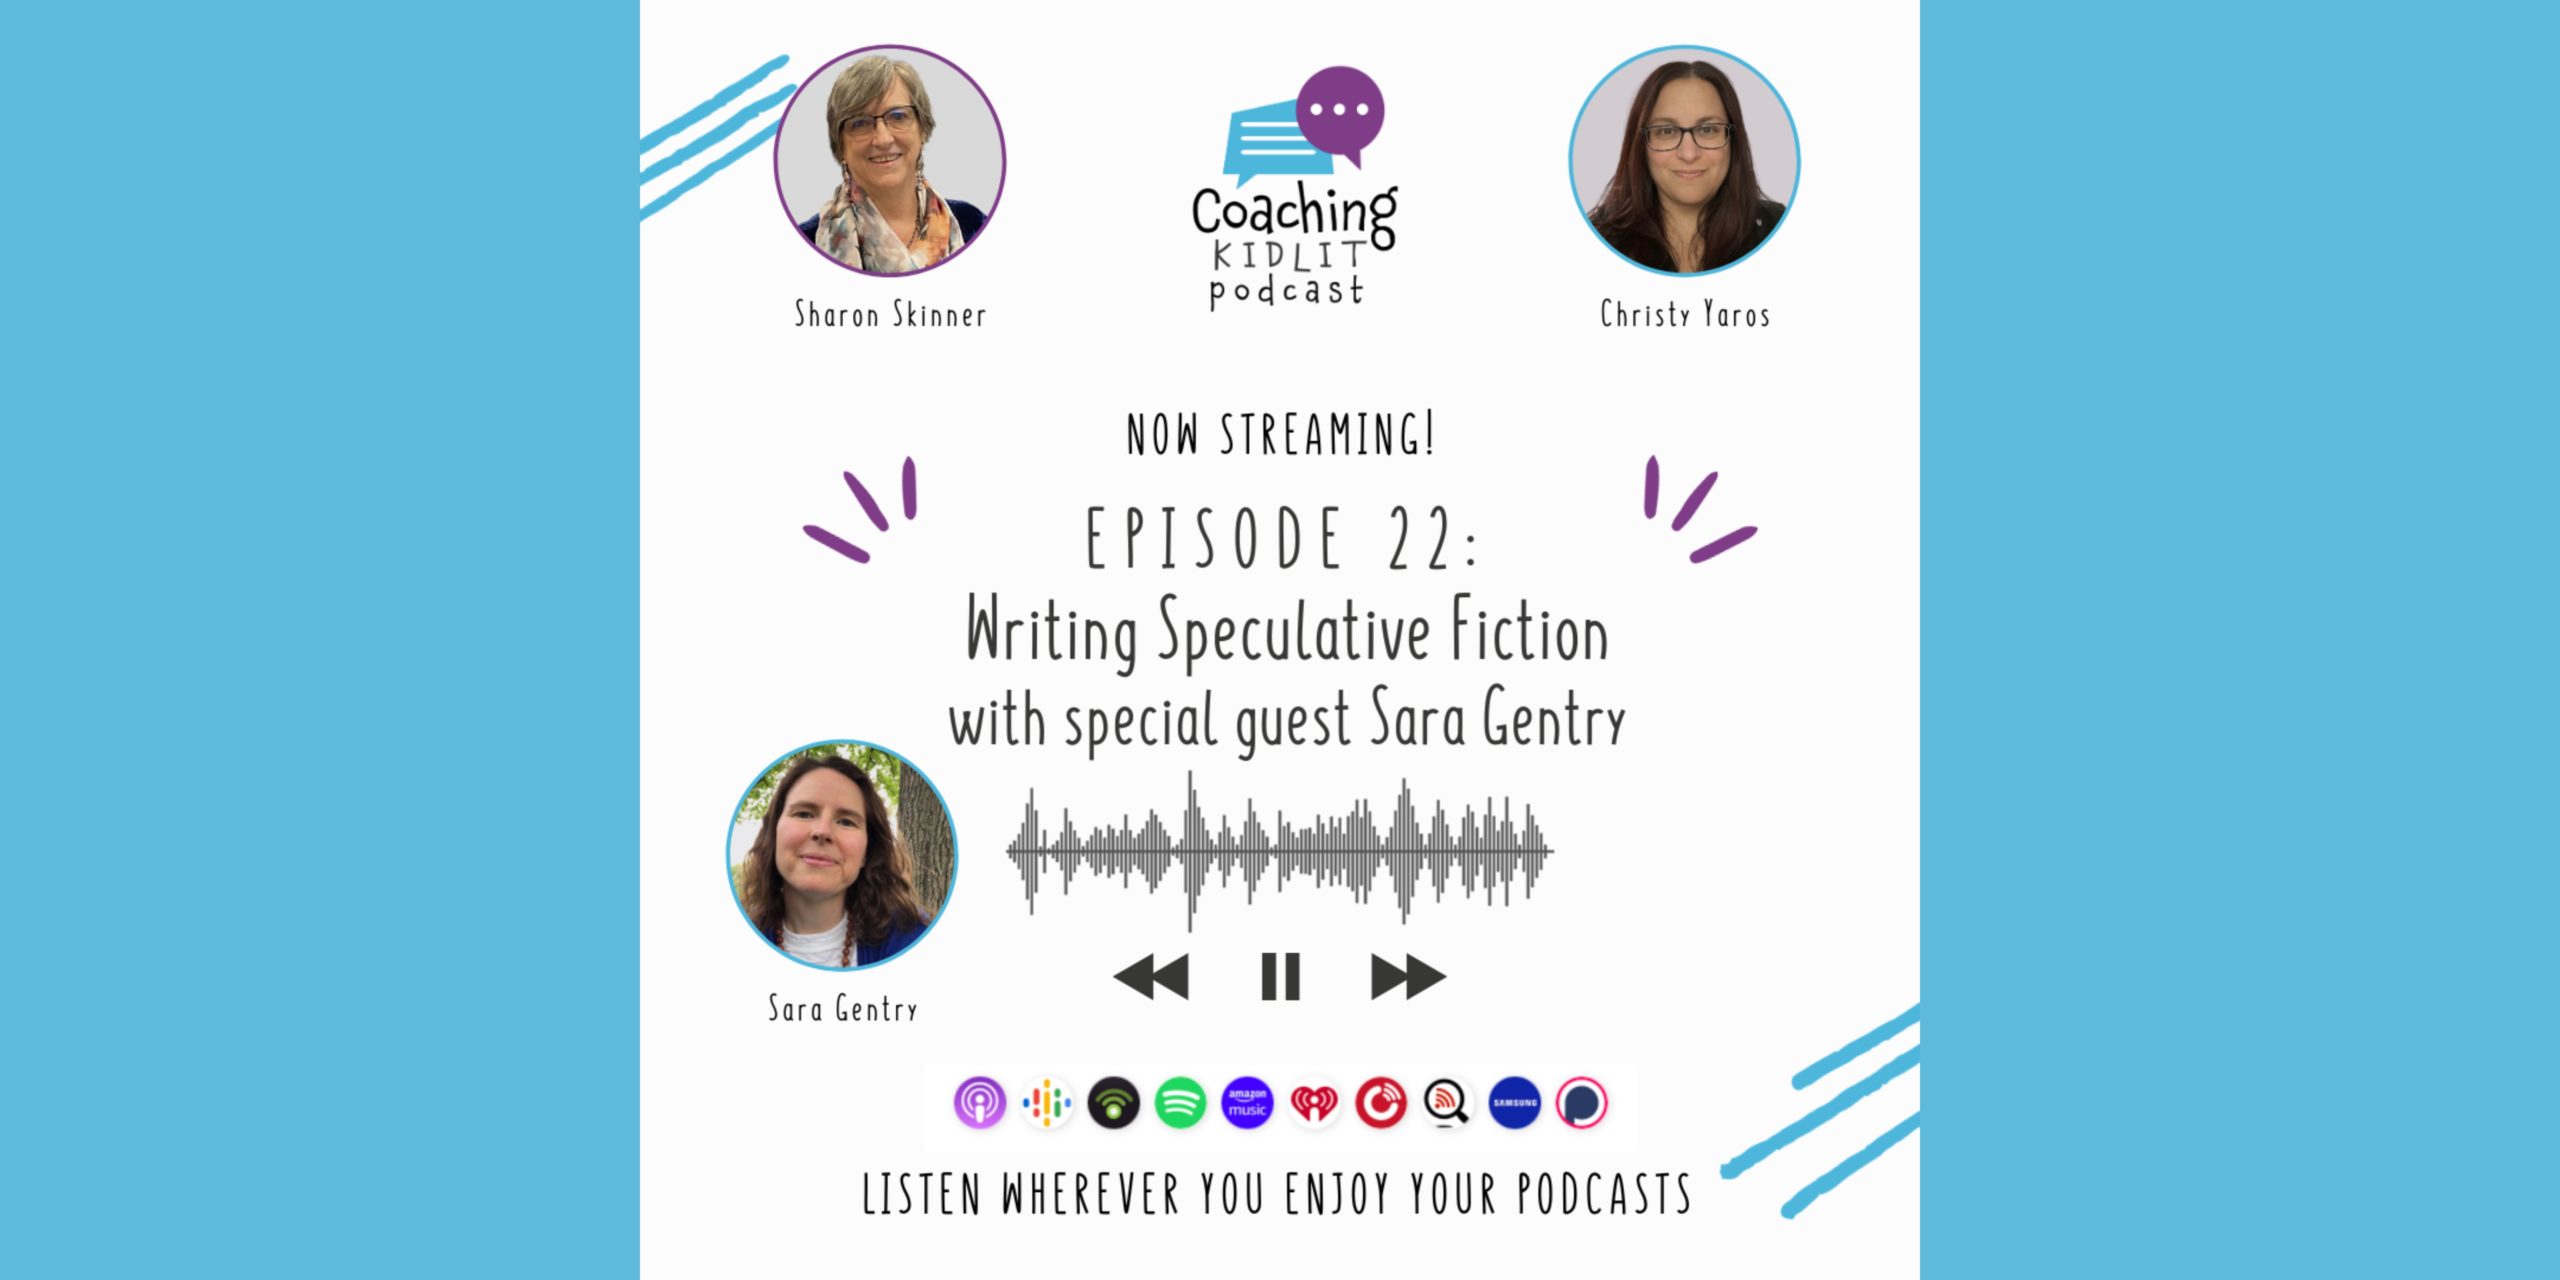 Coaching KidLit Image for Episode 22: Writing Speculative Fiction with Gues Sara Gentry and featuring head shots of Sharon Skinner, Christy Yaros and Sara Gentry